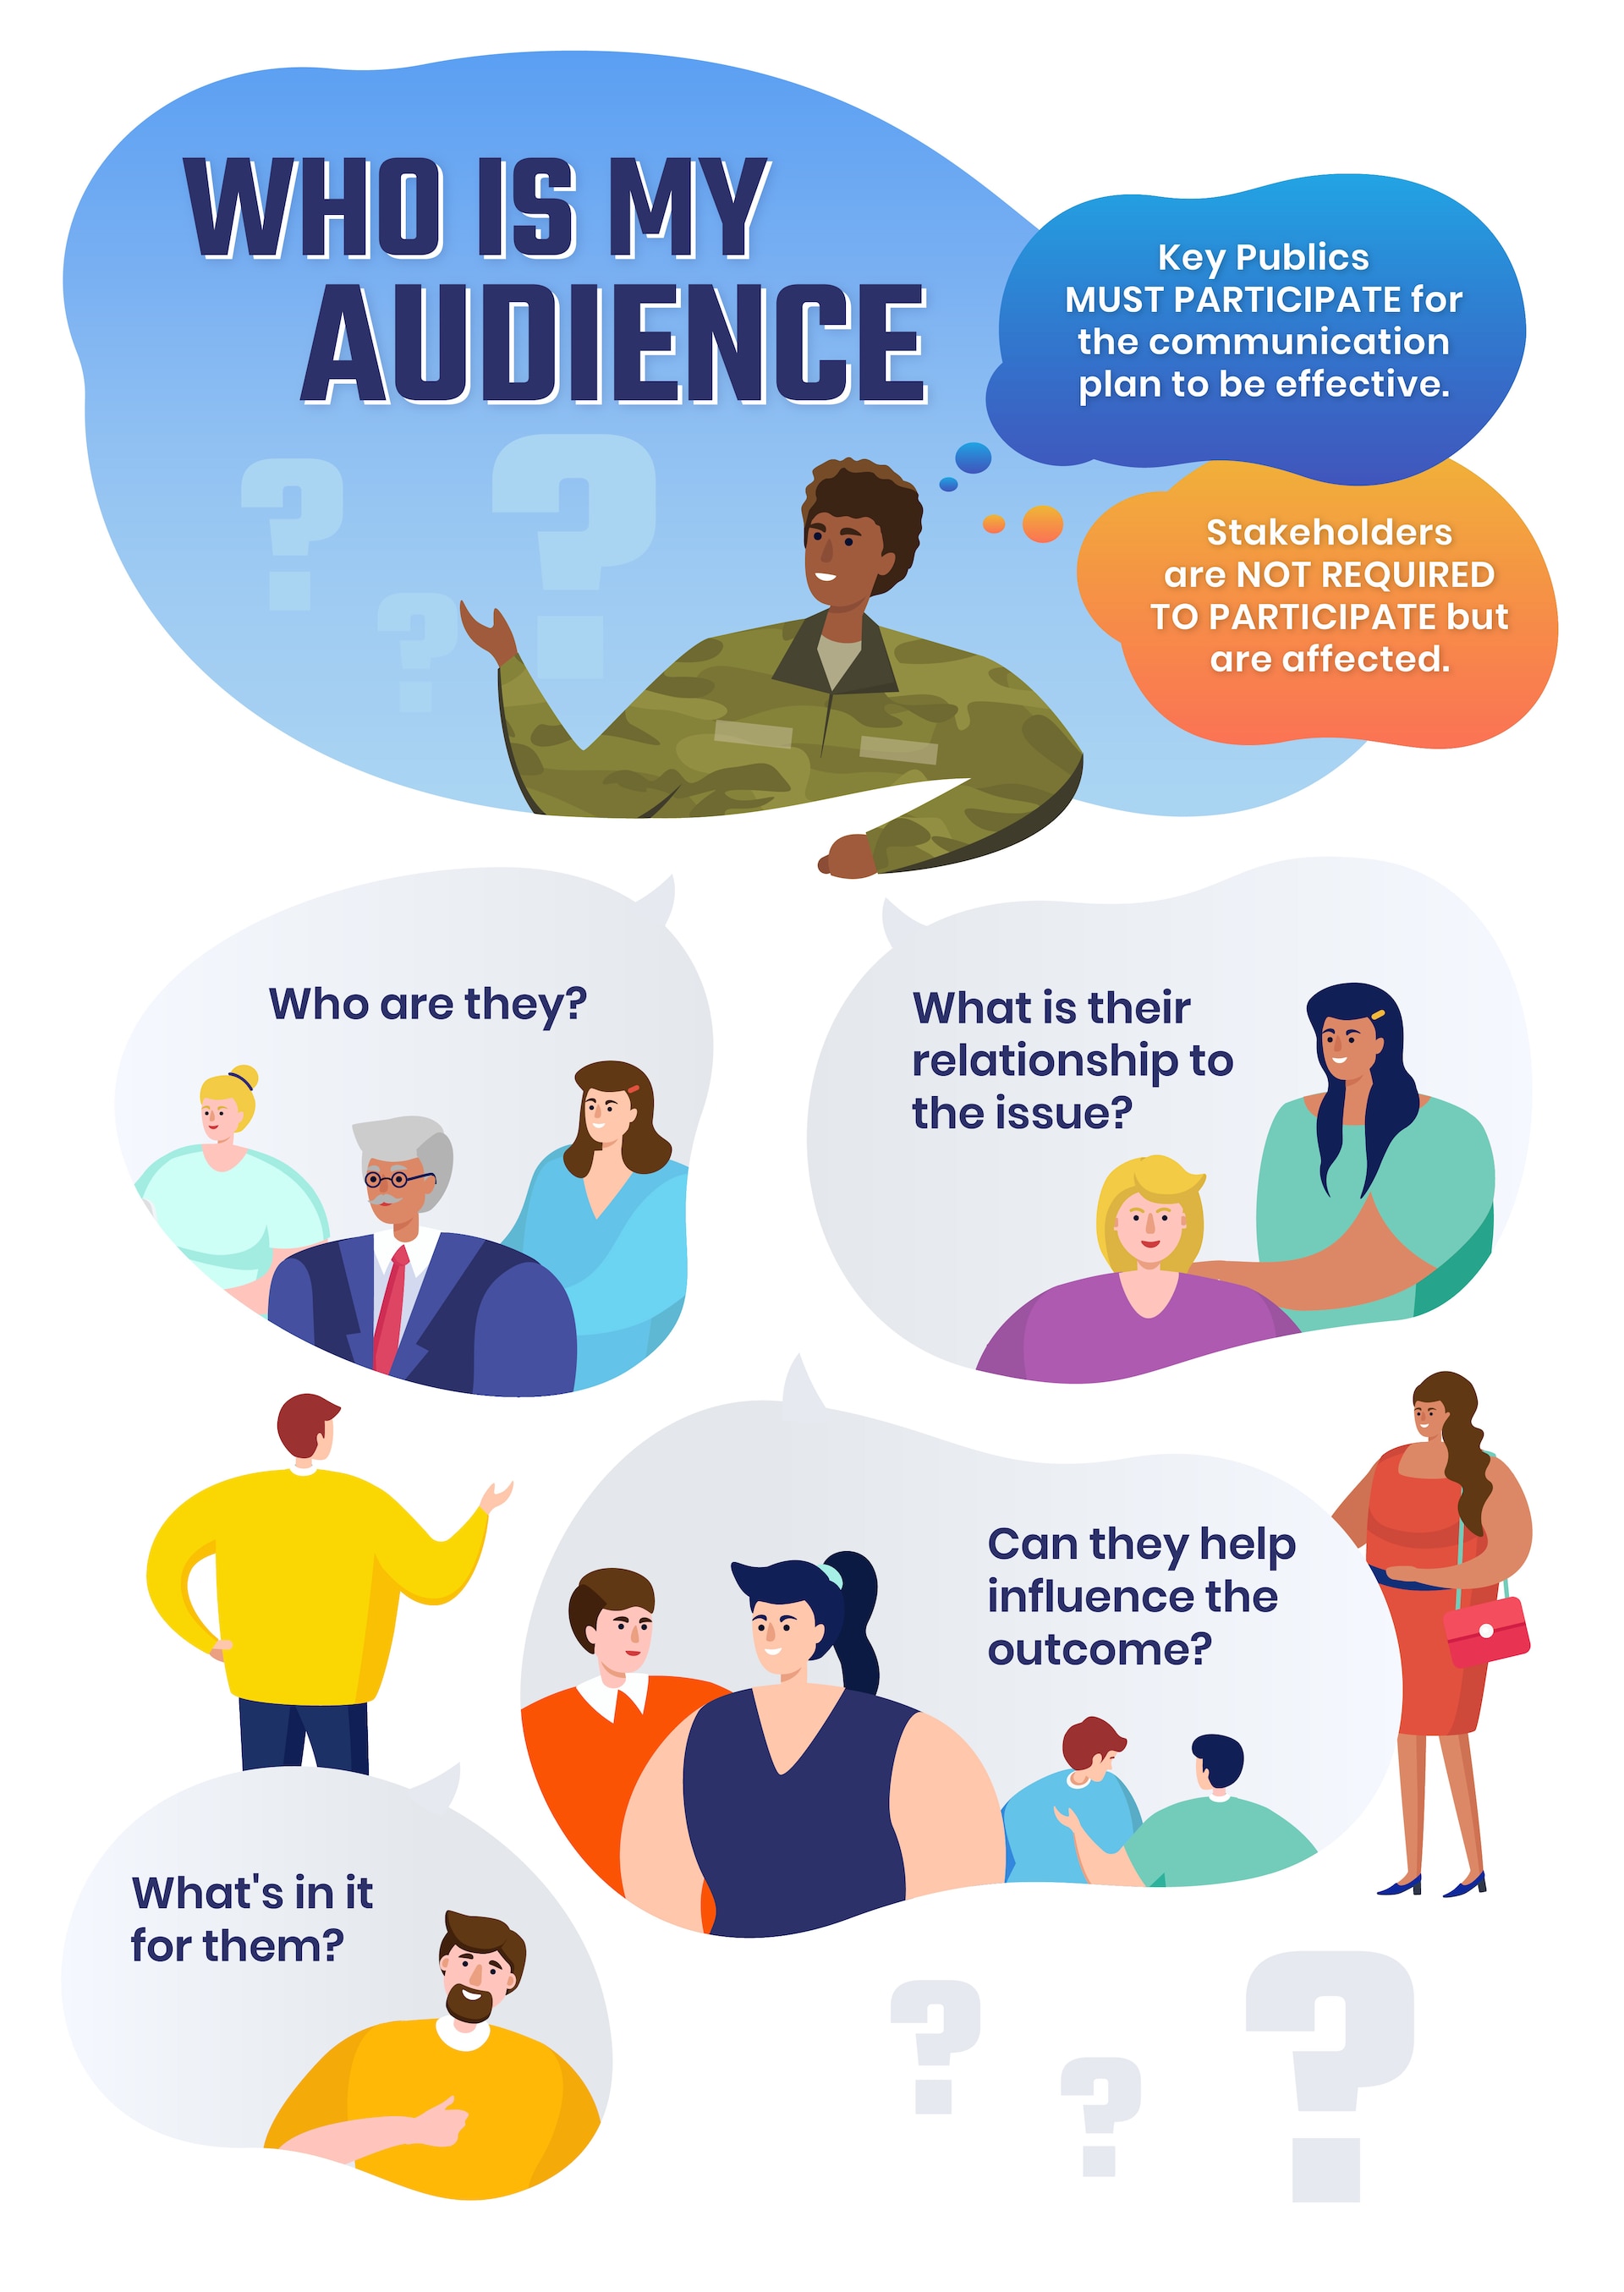 Illustration depicting some questions to ask yourself when identifying who your audiences are and whether they are key publics or stakeholders.